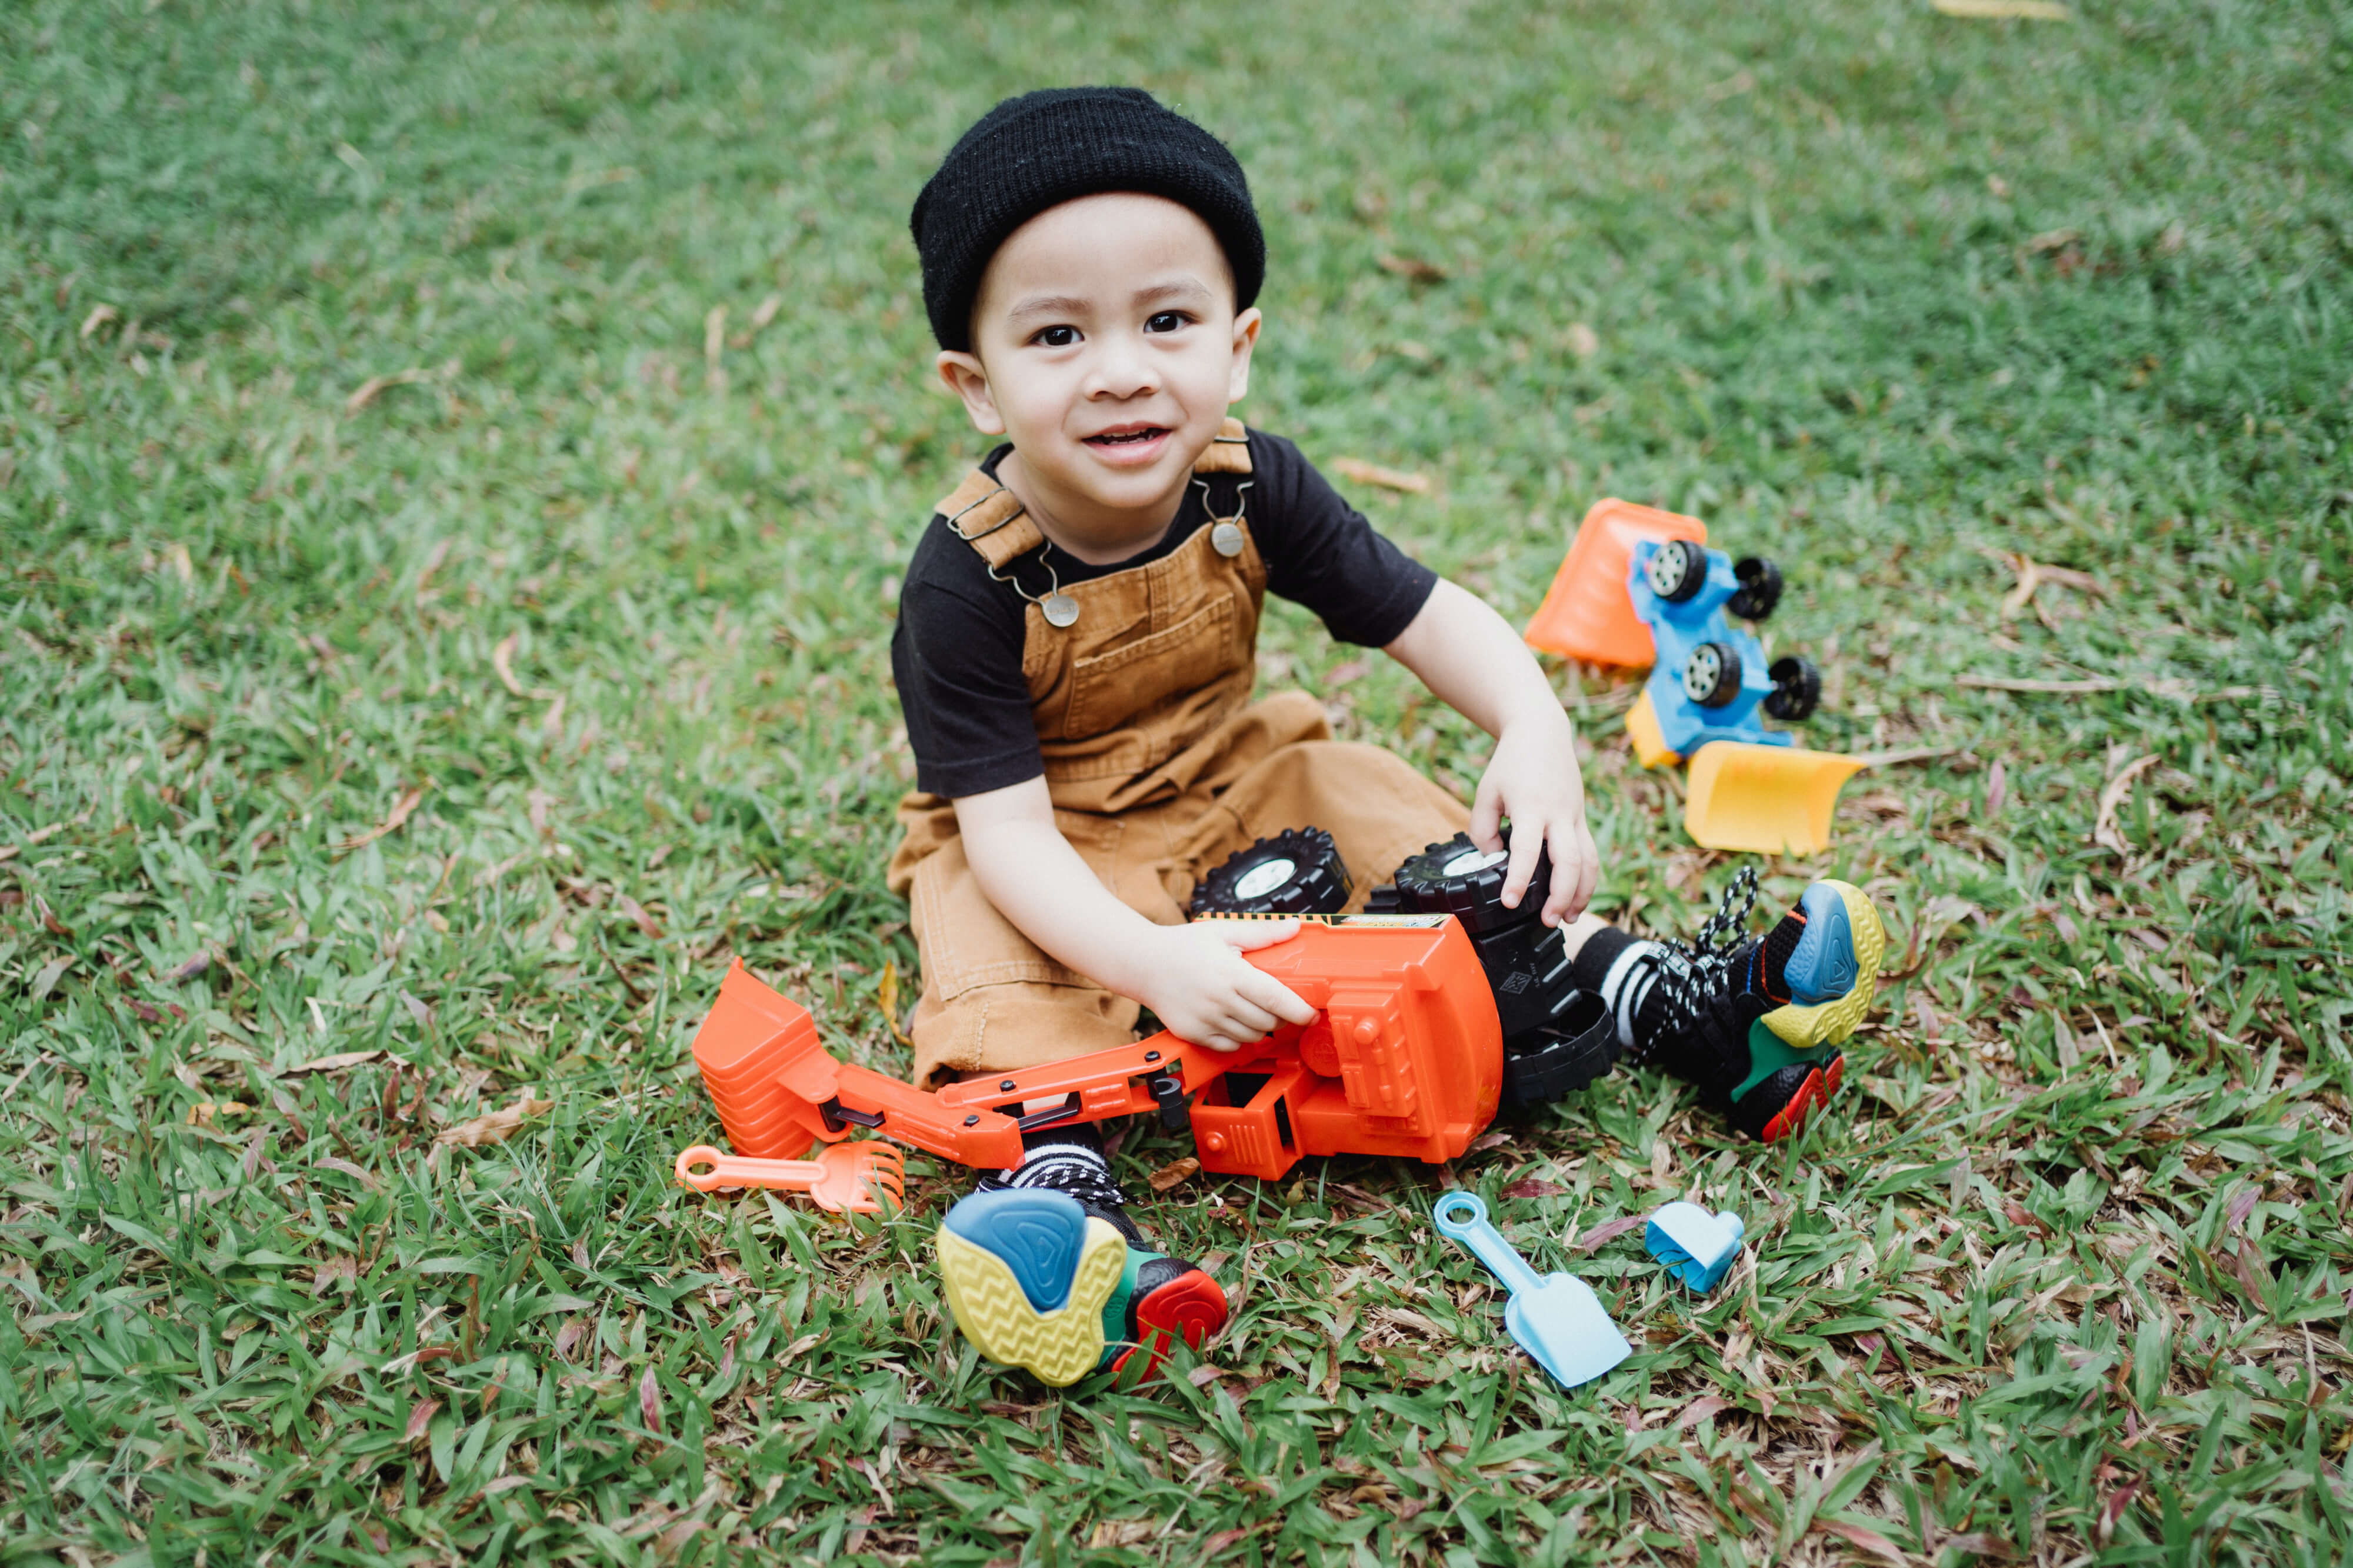 A boy playing with his STEM toys on the grass